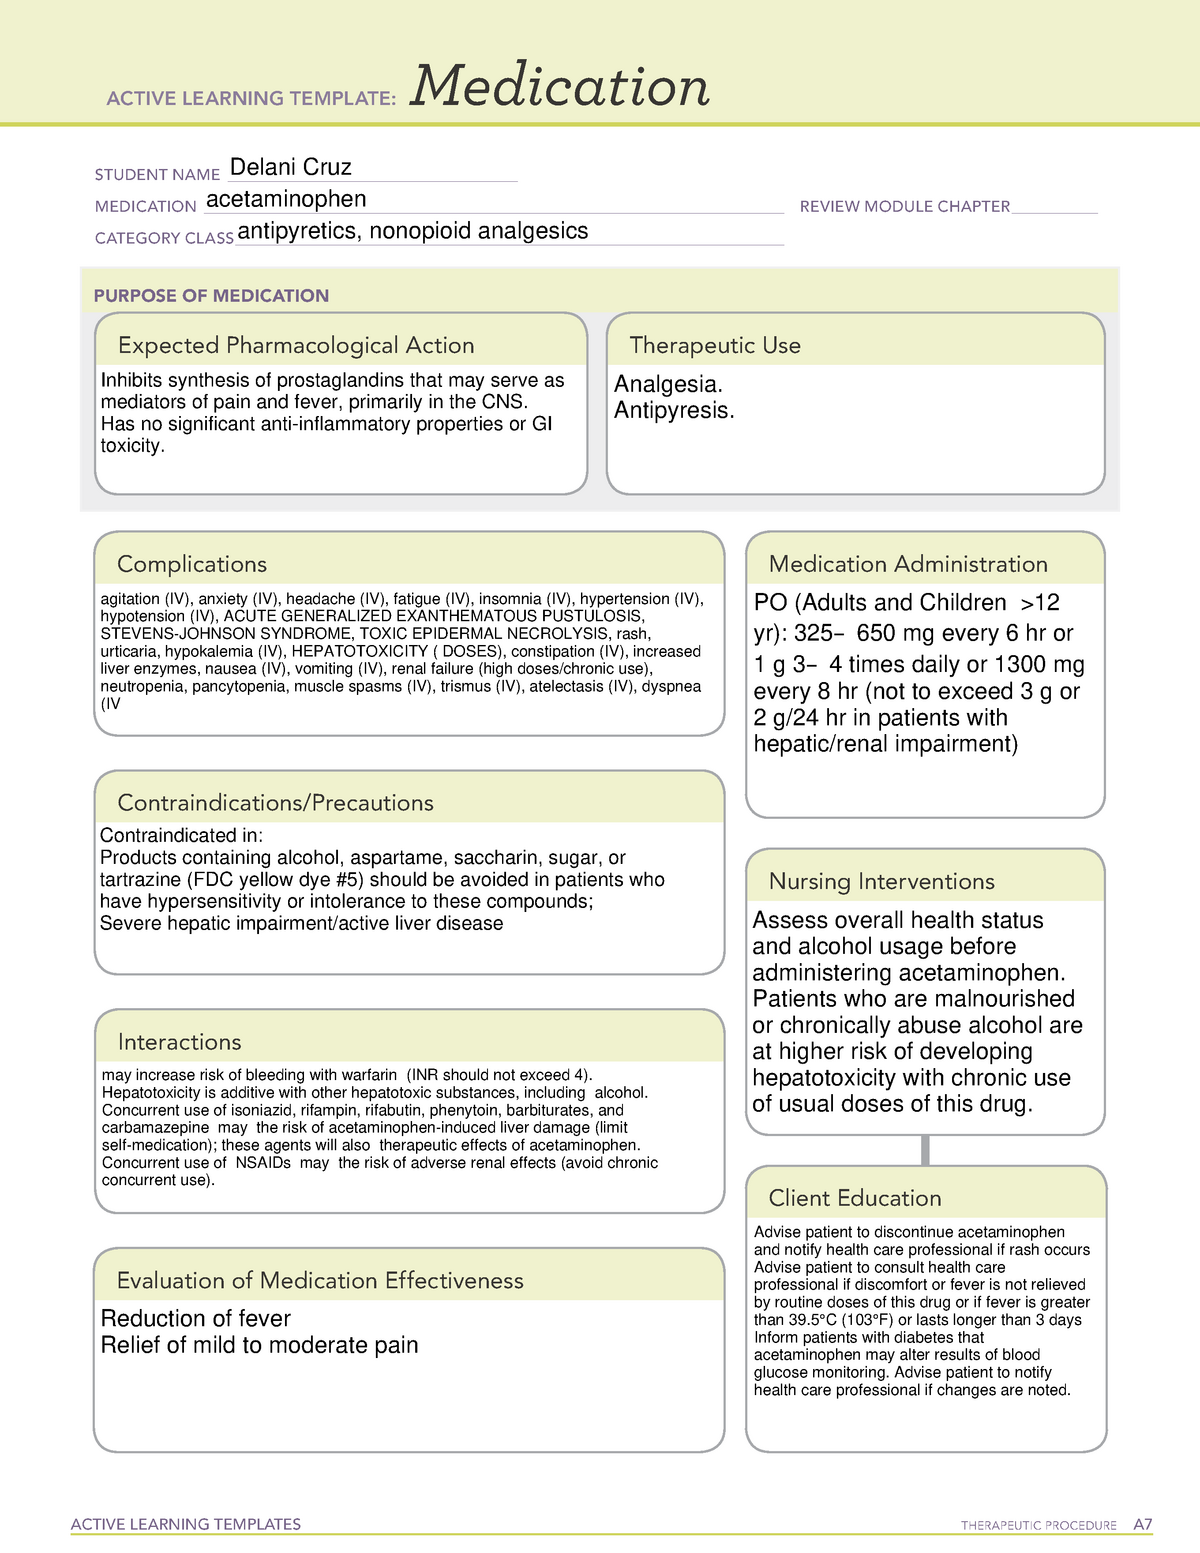 ATI template Acetaminophen - ACTIVE LEARNING TEMPLATES THERAPEUTIC ...